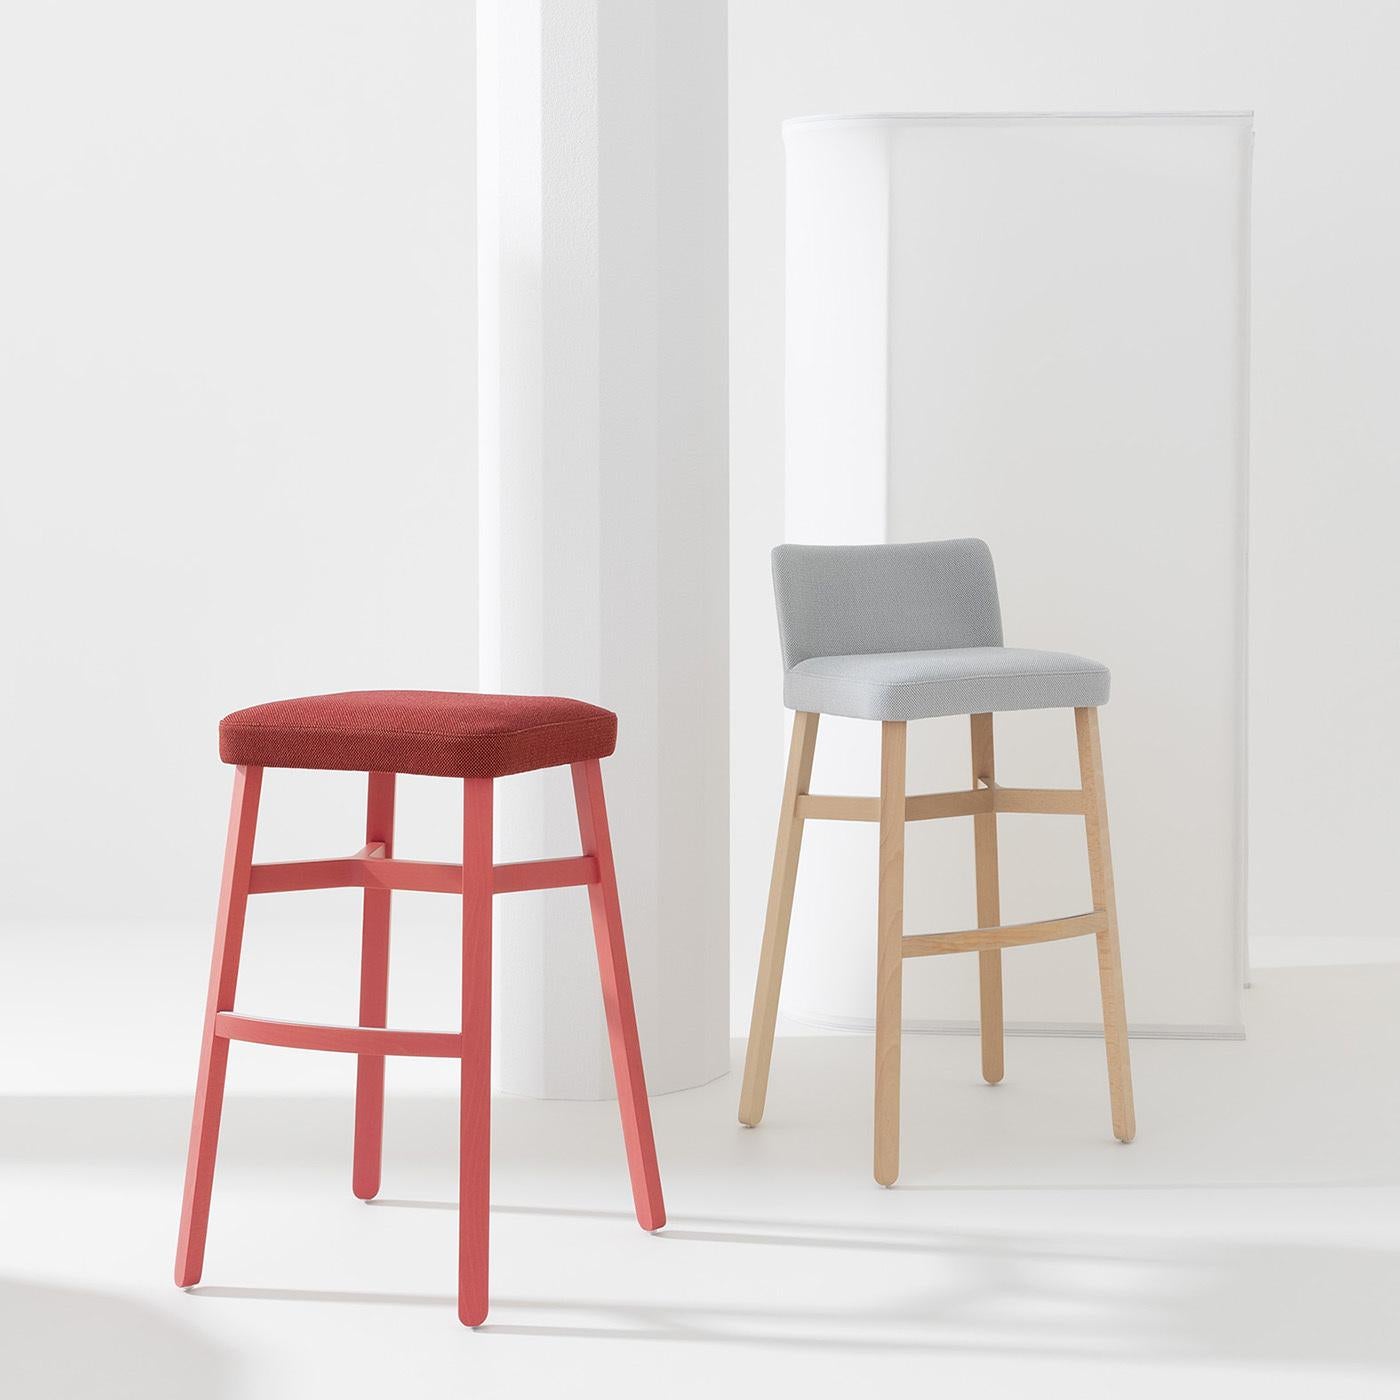 This superb stool by Emilio Nanni balances the liveliness of vibrant colors with an exquisitely modern aesthetic. Showcasing the distinctive trait of the Croissant Collection - the structural crossing under the seat - this piece features a slender